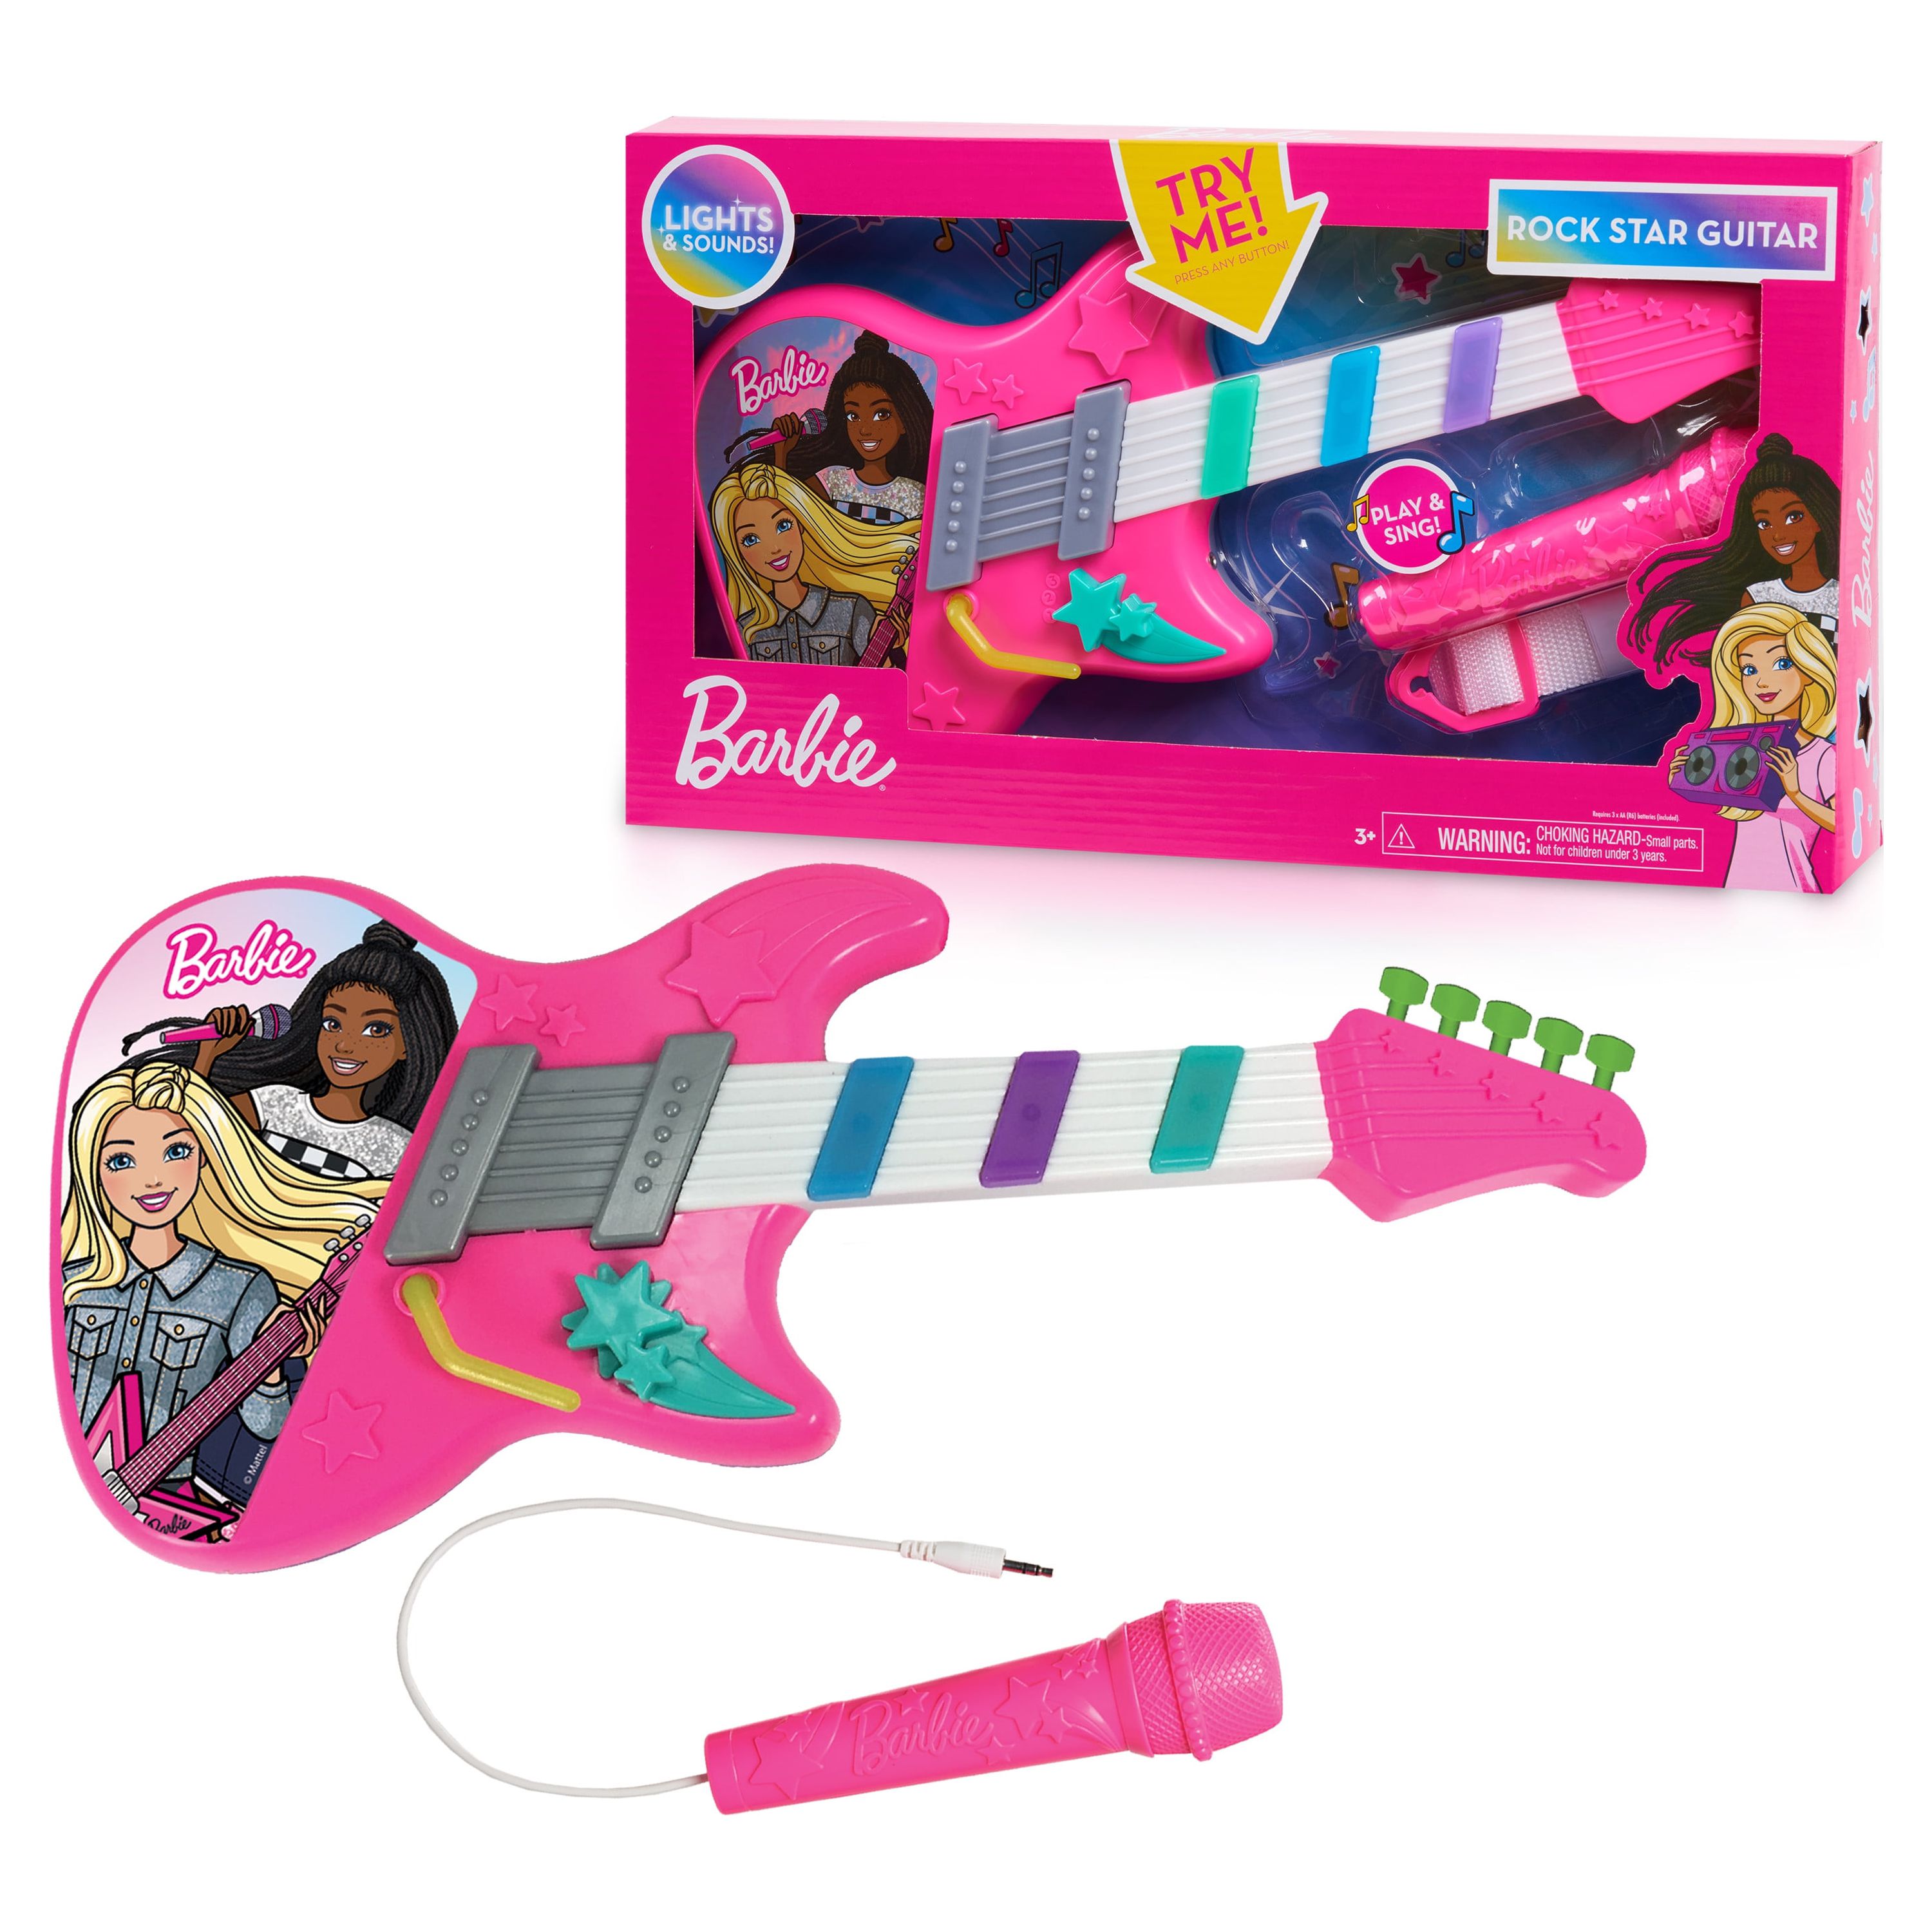 Barbie Rock Star Guitar, Interactive Electronic Toy Guitar with Lights, Sounds, and Microphone,  Kids Toys for Ages 3 Up, Gifts and Presents - image 1 of 11